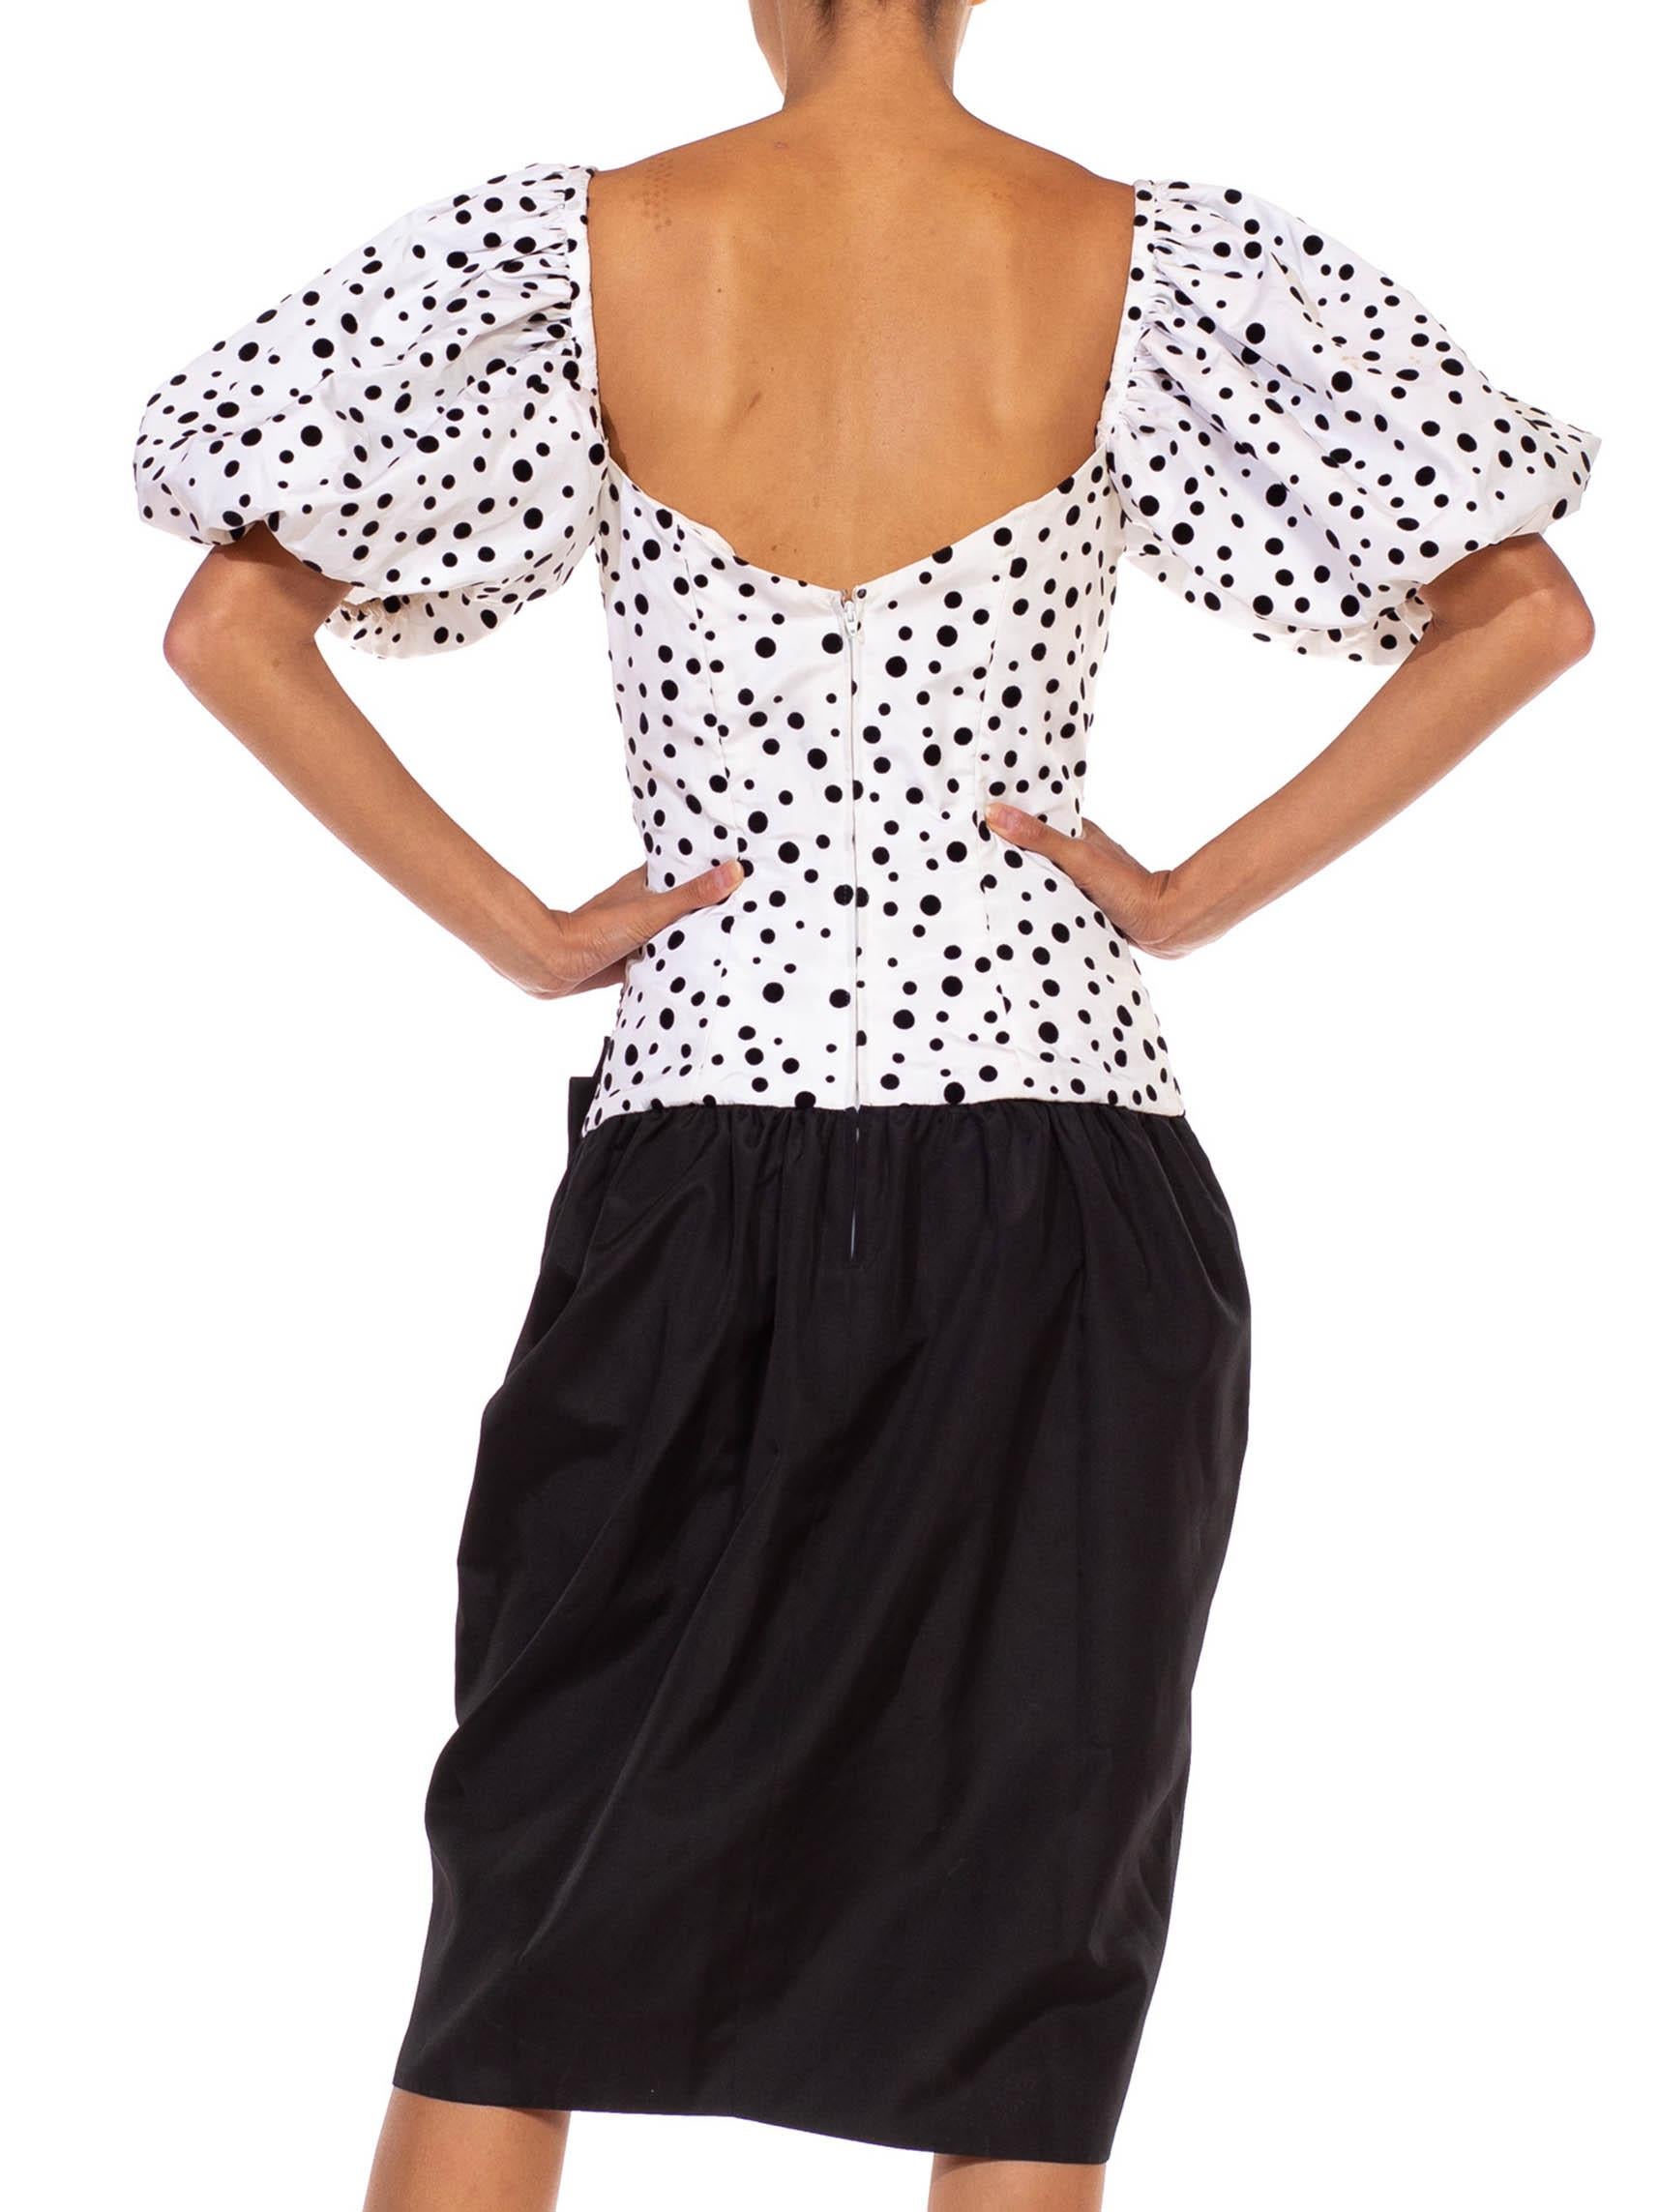 1980S Black & White Polka Dot Puff Sleeve Cocktail Dress With Large Bow For Sale 3